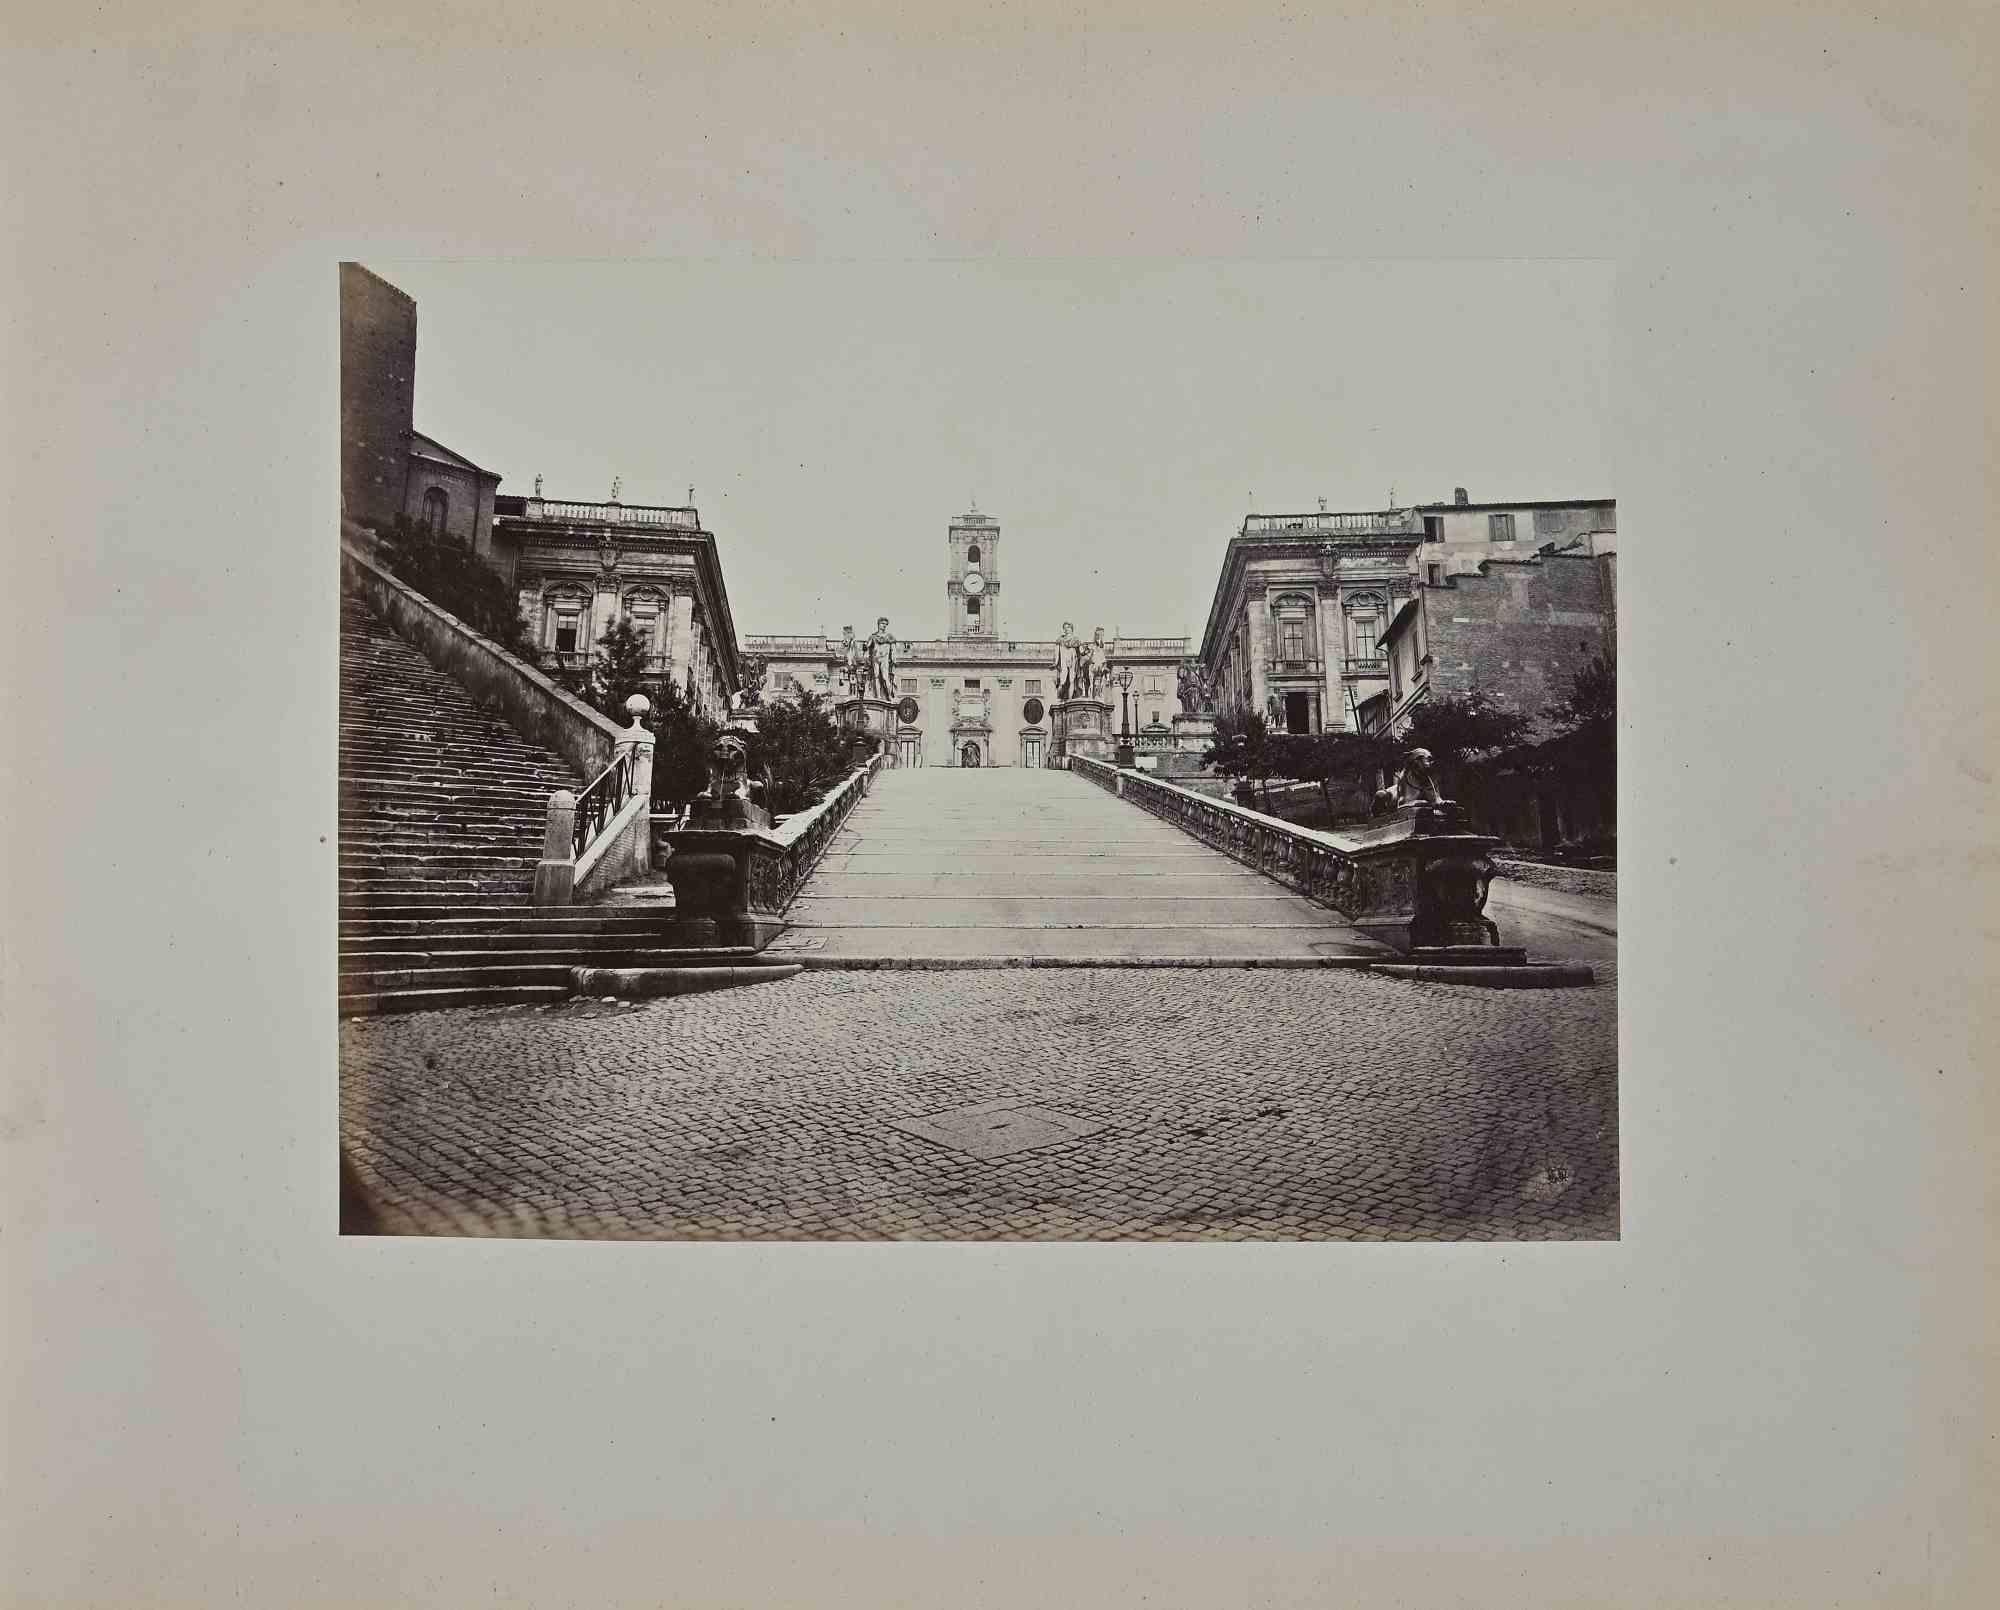 Francesco Sidoli Landscape Photograph - Ancient View of the Stairs to Capitolium-Photograph by F. Sidoli -19th Century